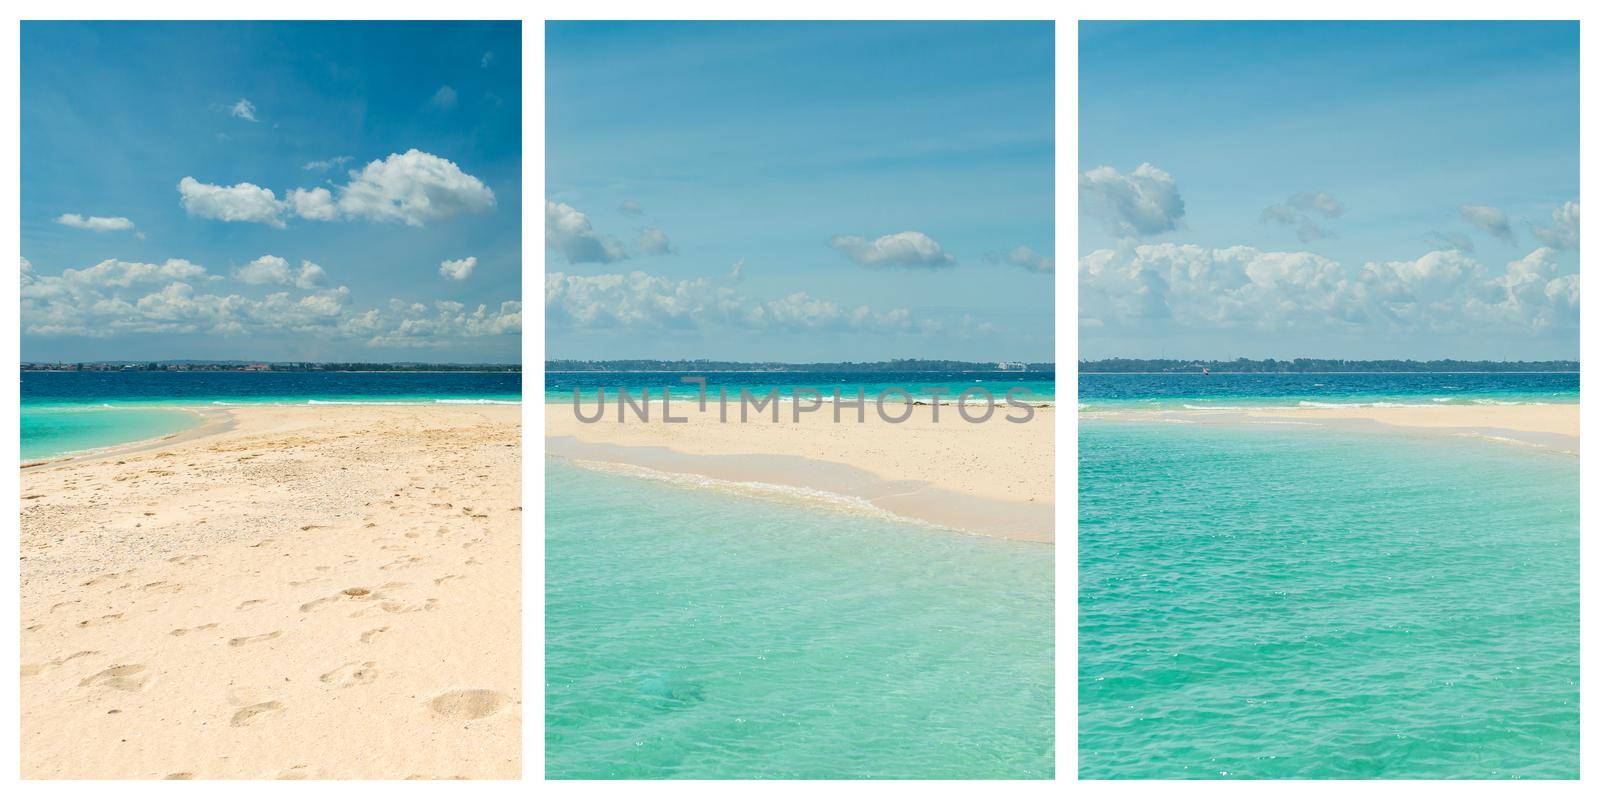 Beatiful sea coast view collage with sand, ocean and sky. Idellyc paradise place pictures set